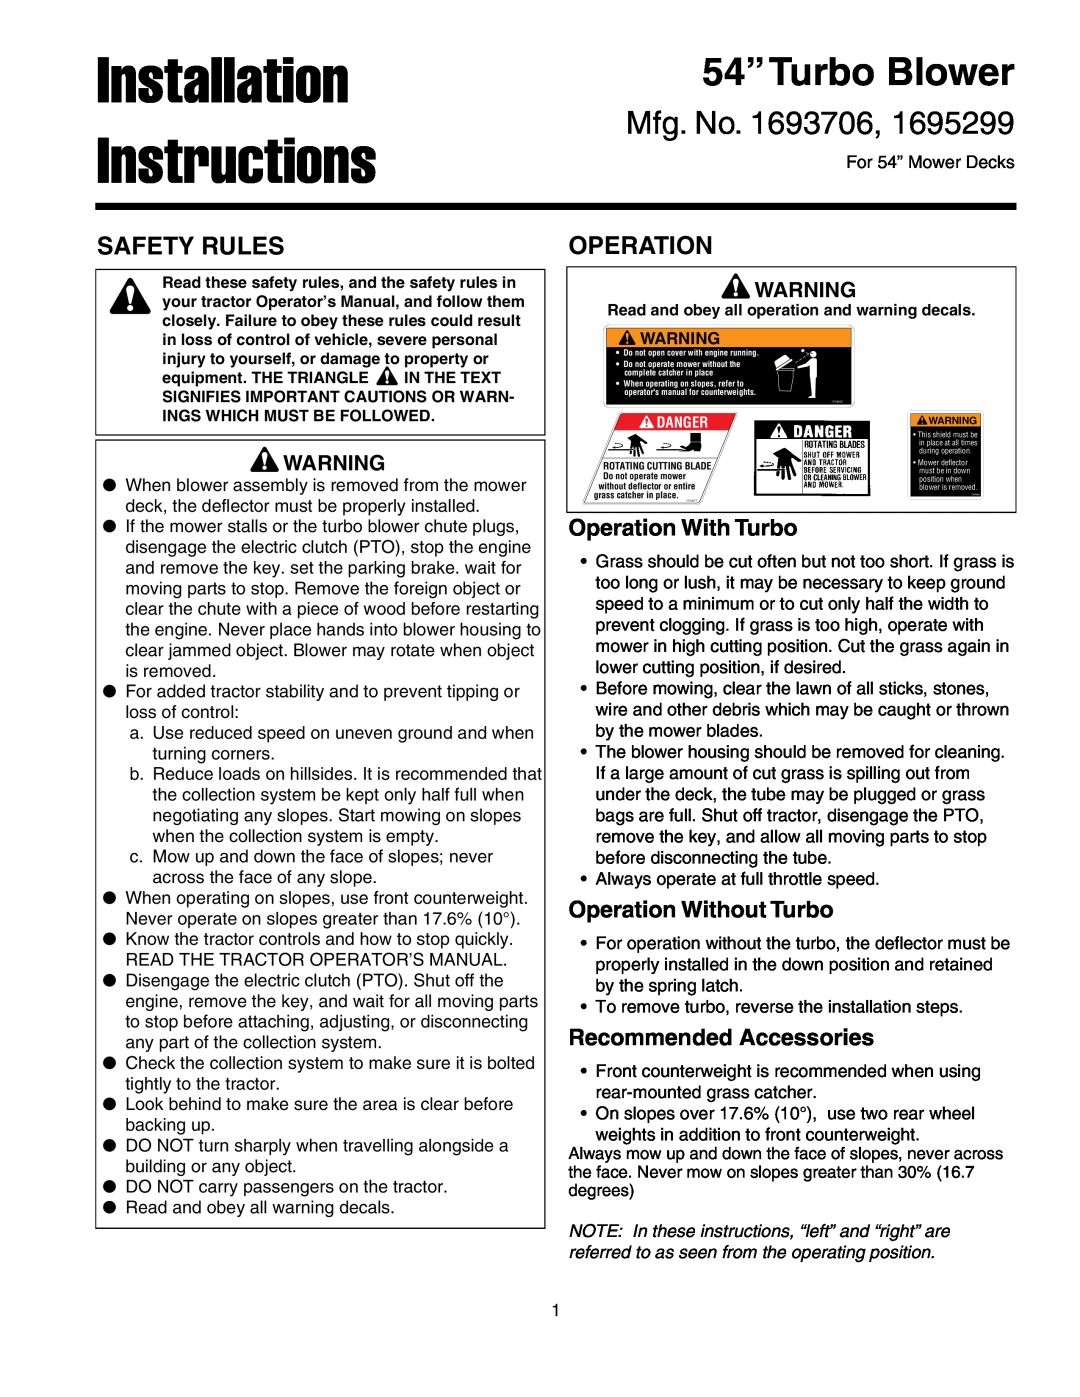 Snapper 1695299 installation instructions Safety Rules, Operation, Installation Instructions, 54”Turbo Blower, Mfg. No 